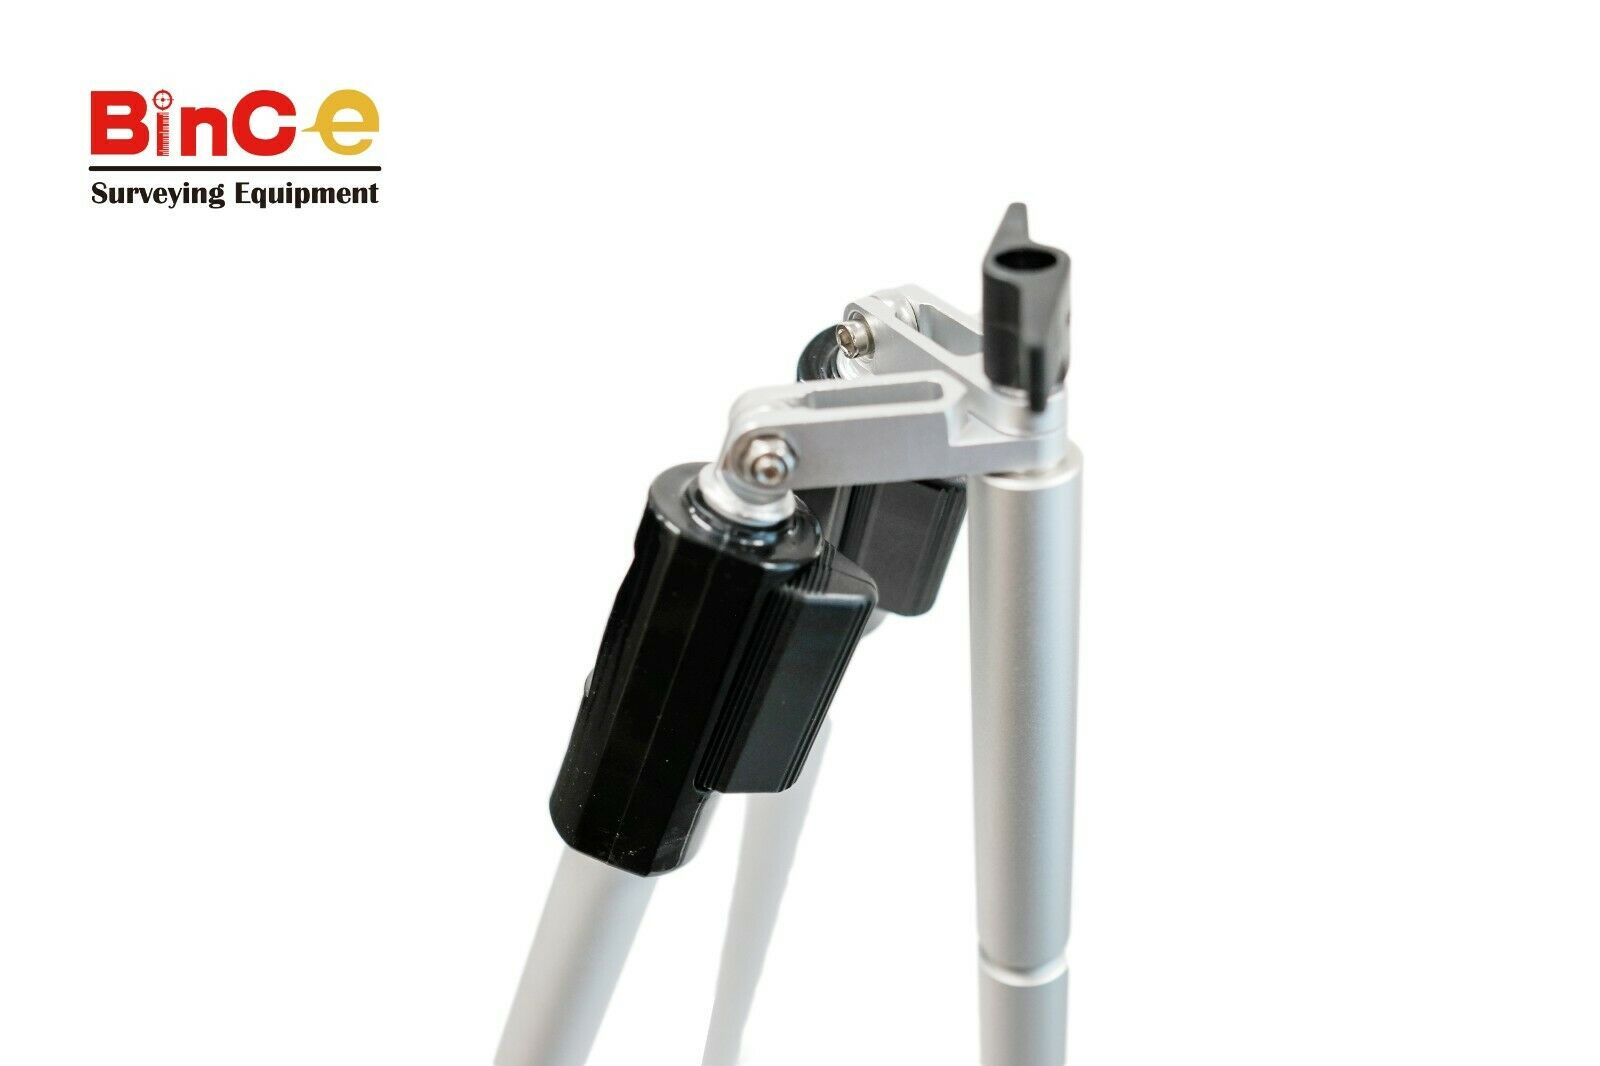 Leica Type Dual Strut Support Bipod for Survey Telescopic Prism Poles Surveying